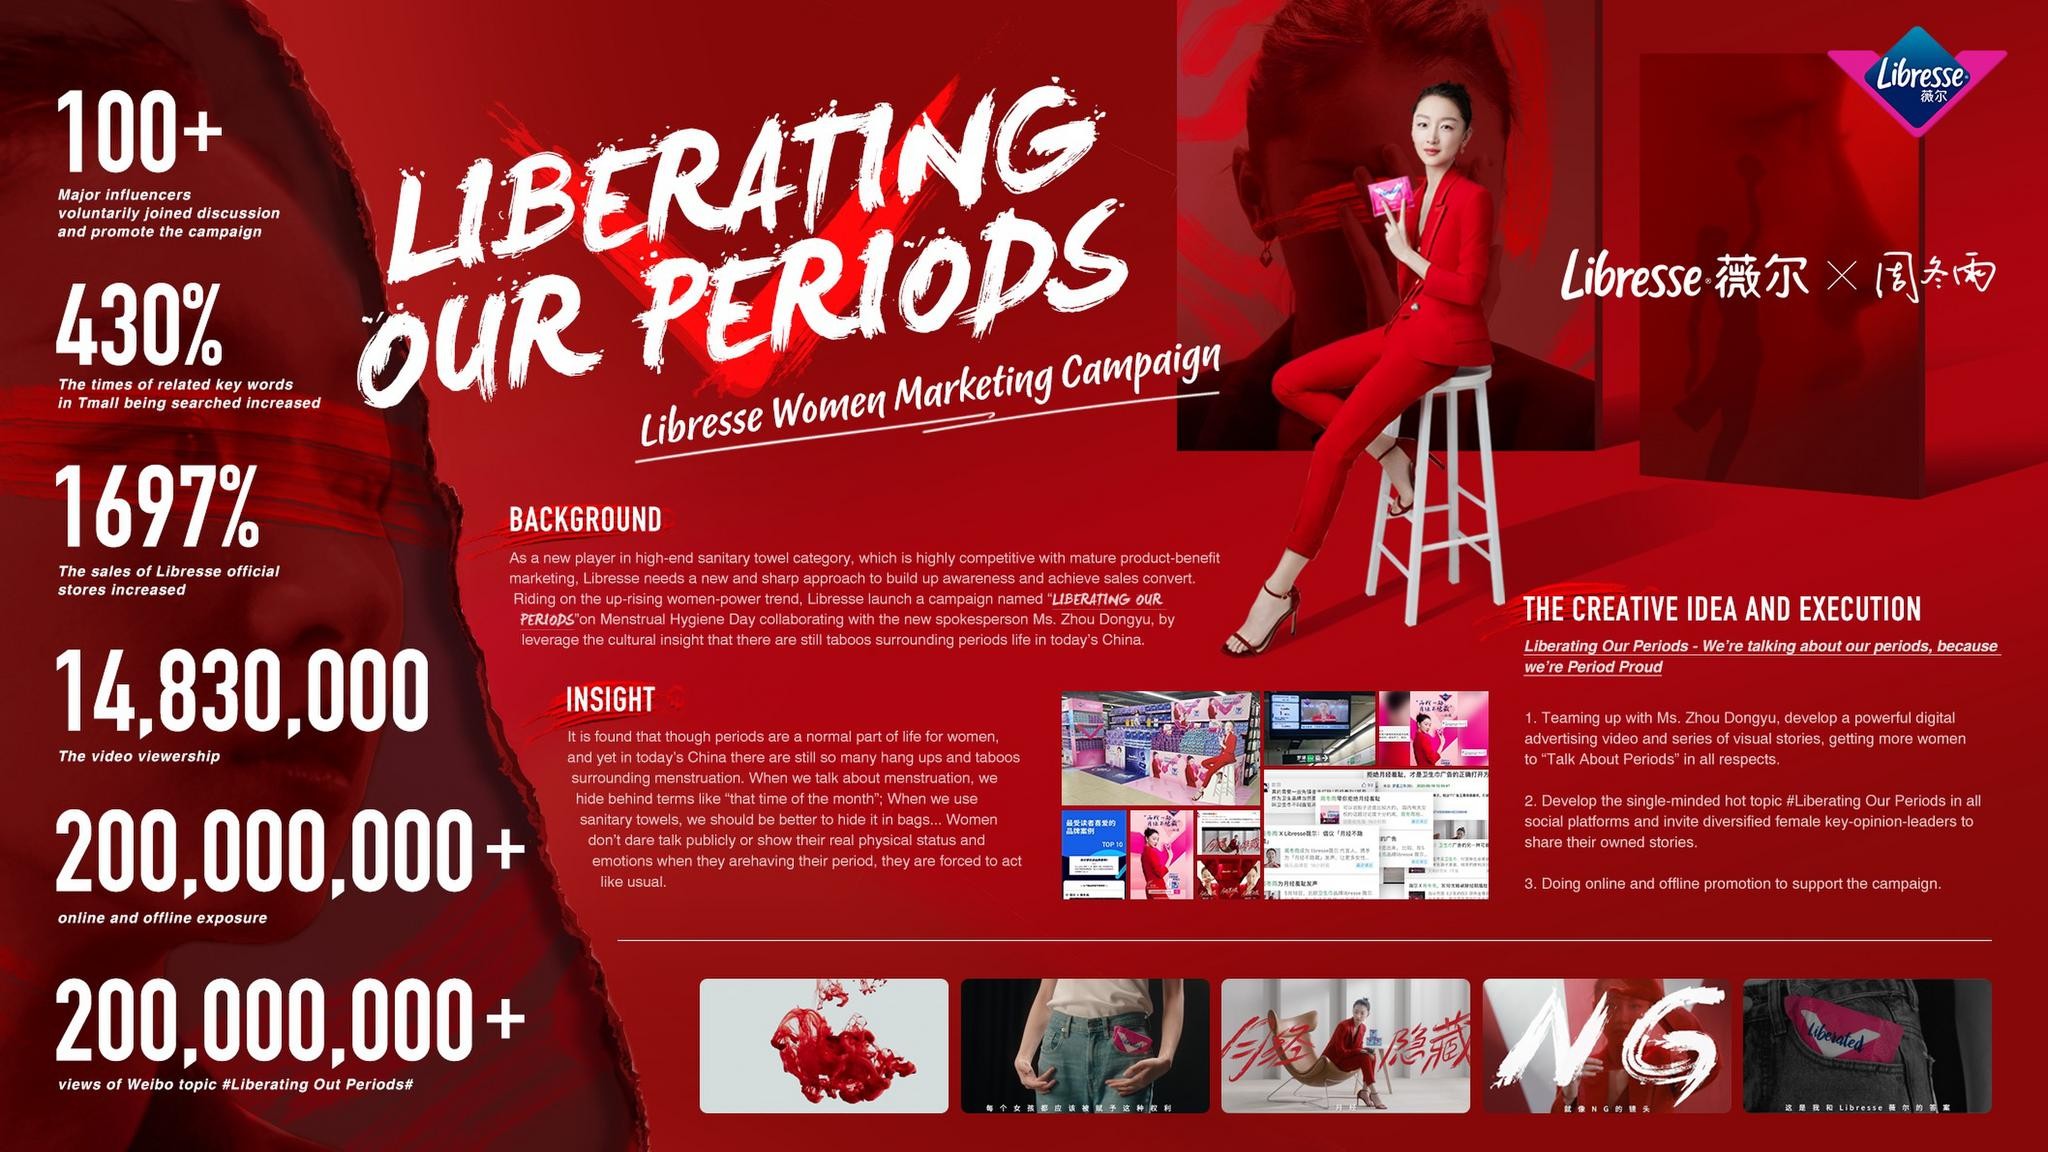 Liberating Our Periods - Libresse Women Marketing Campaign